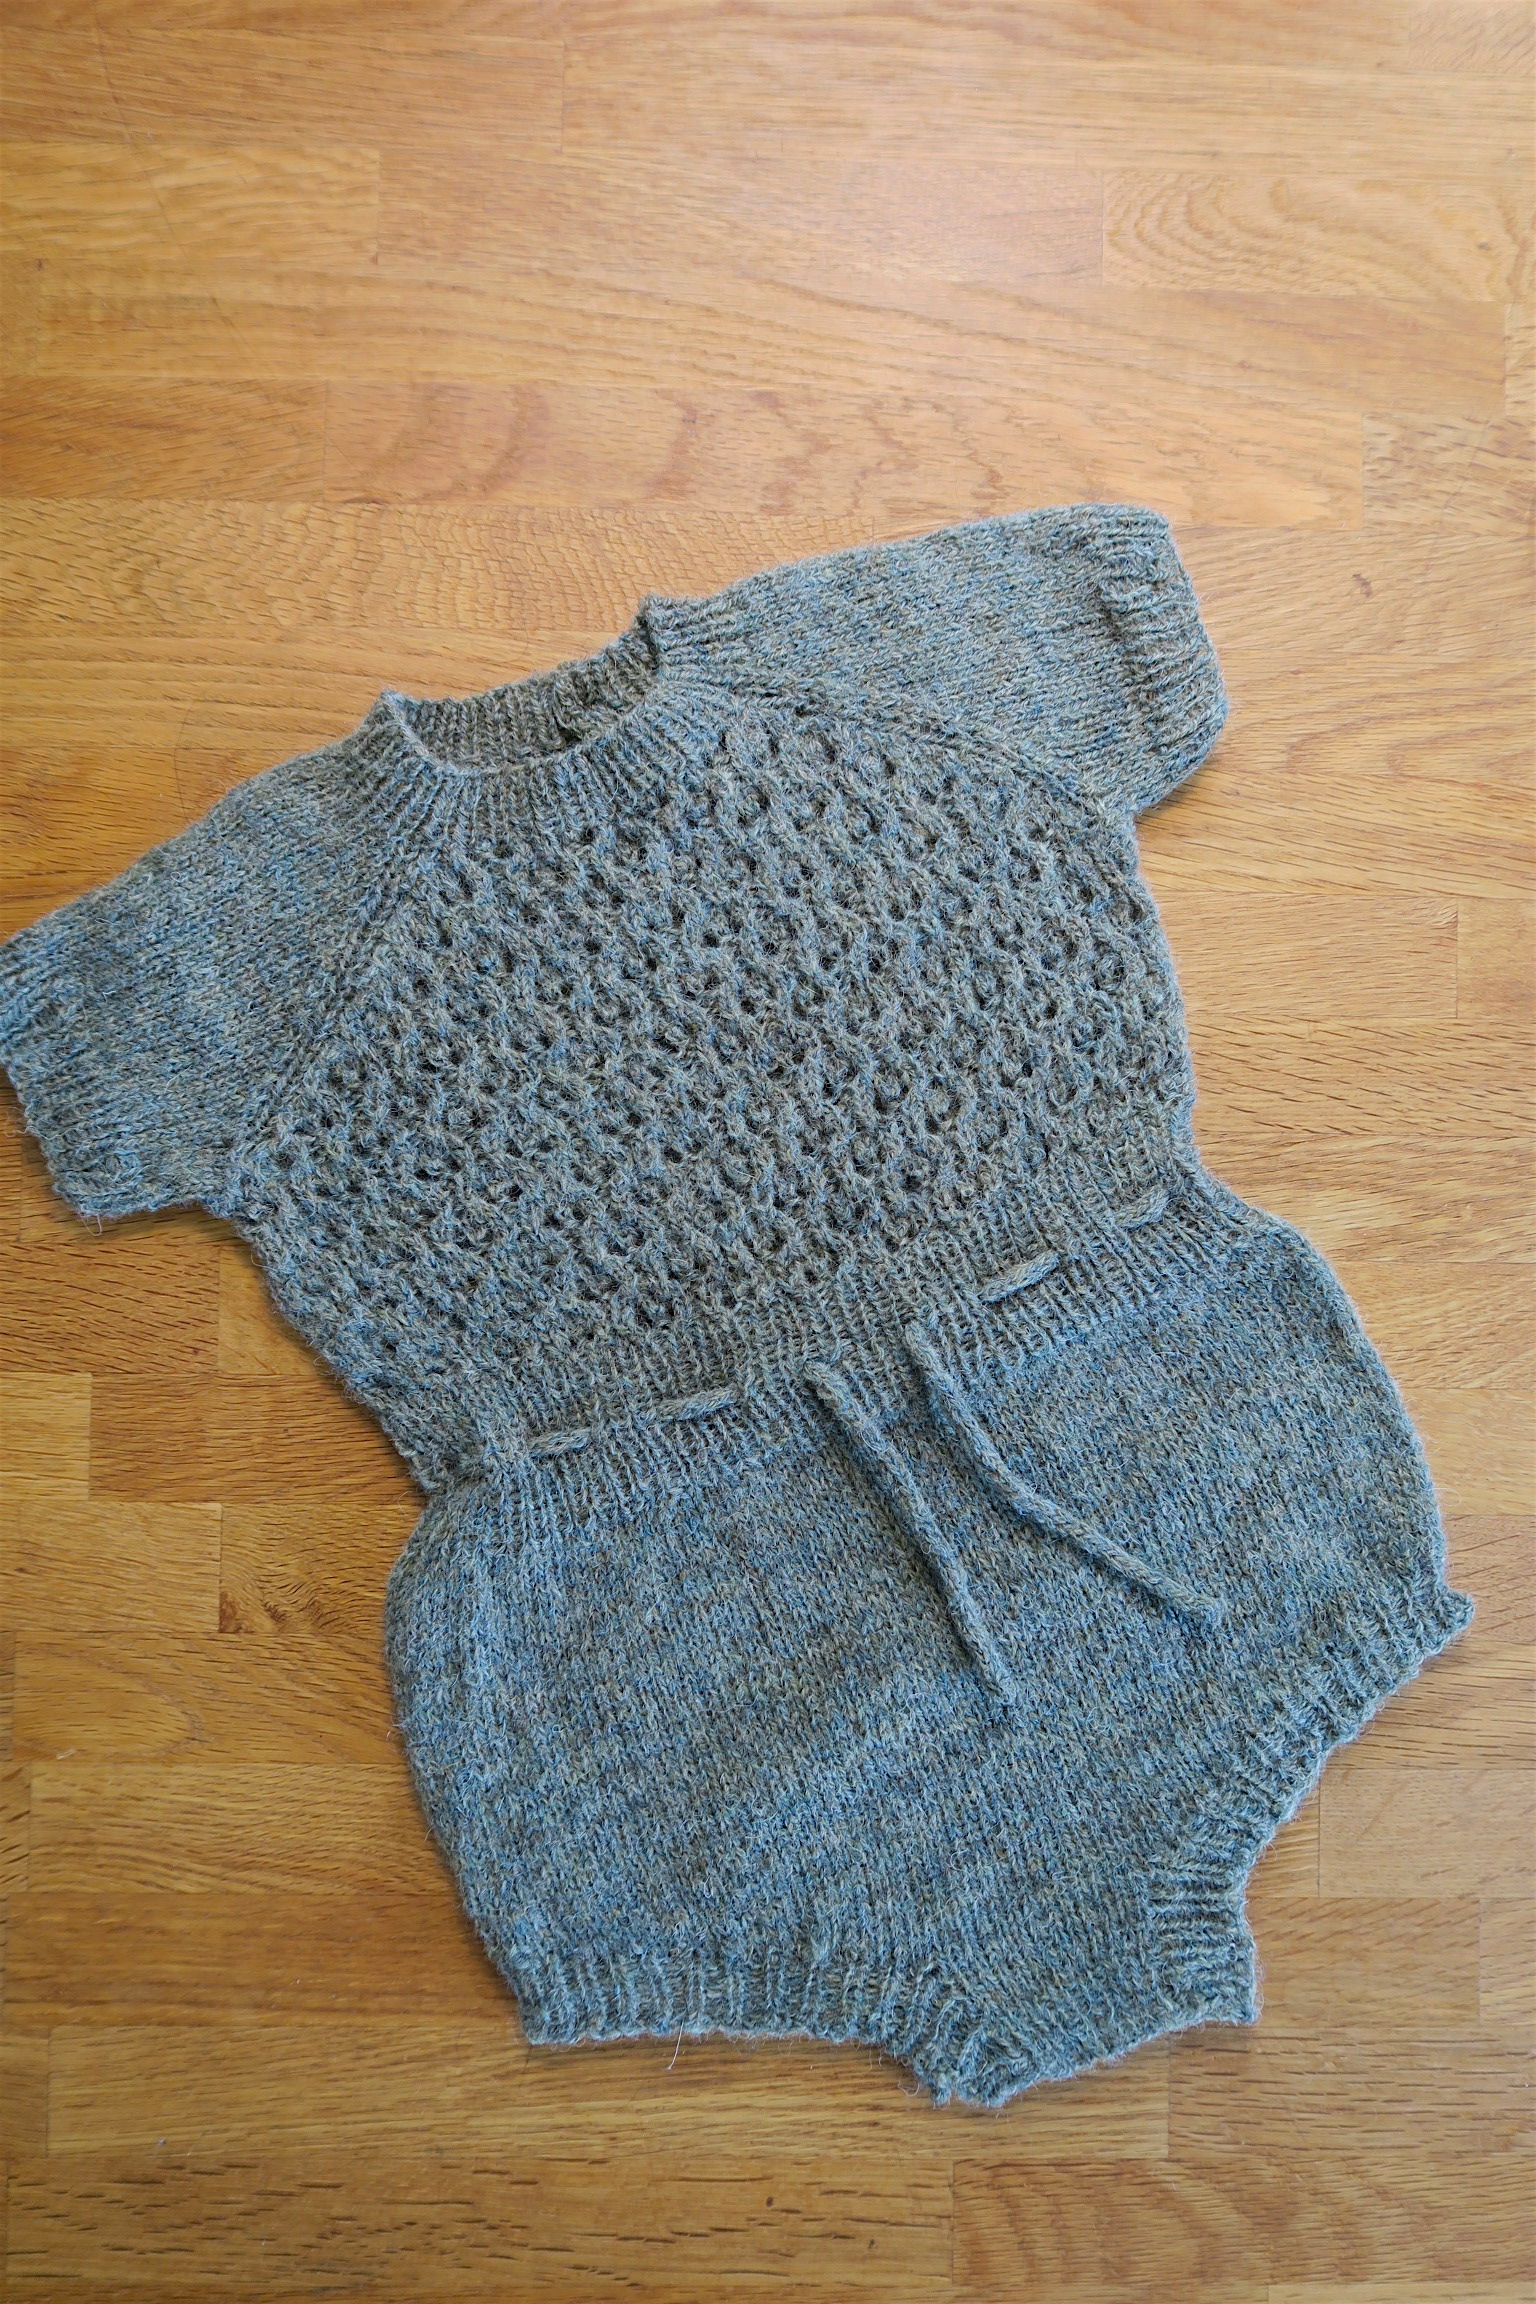 Designer Baby Knitting Patterns Have You Knitted Anything For The Ba